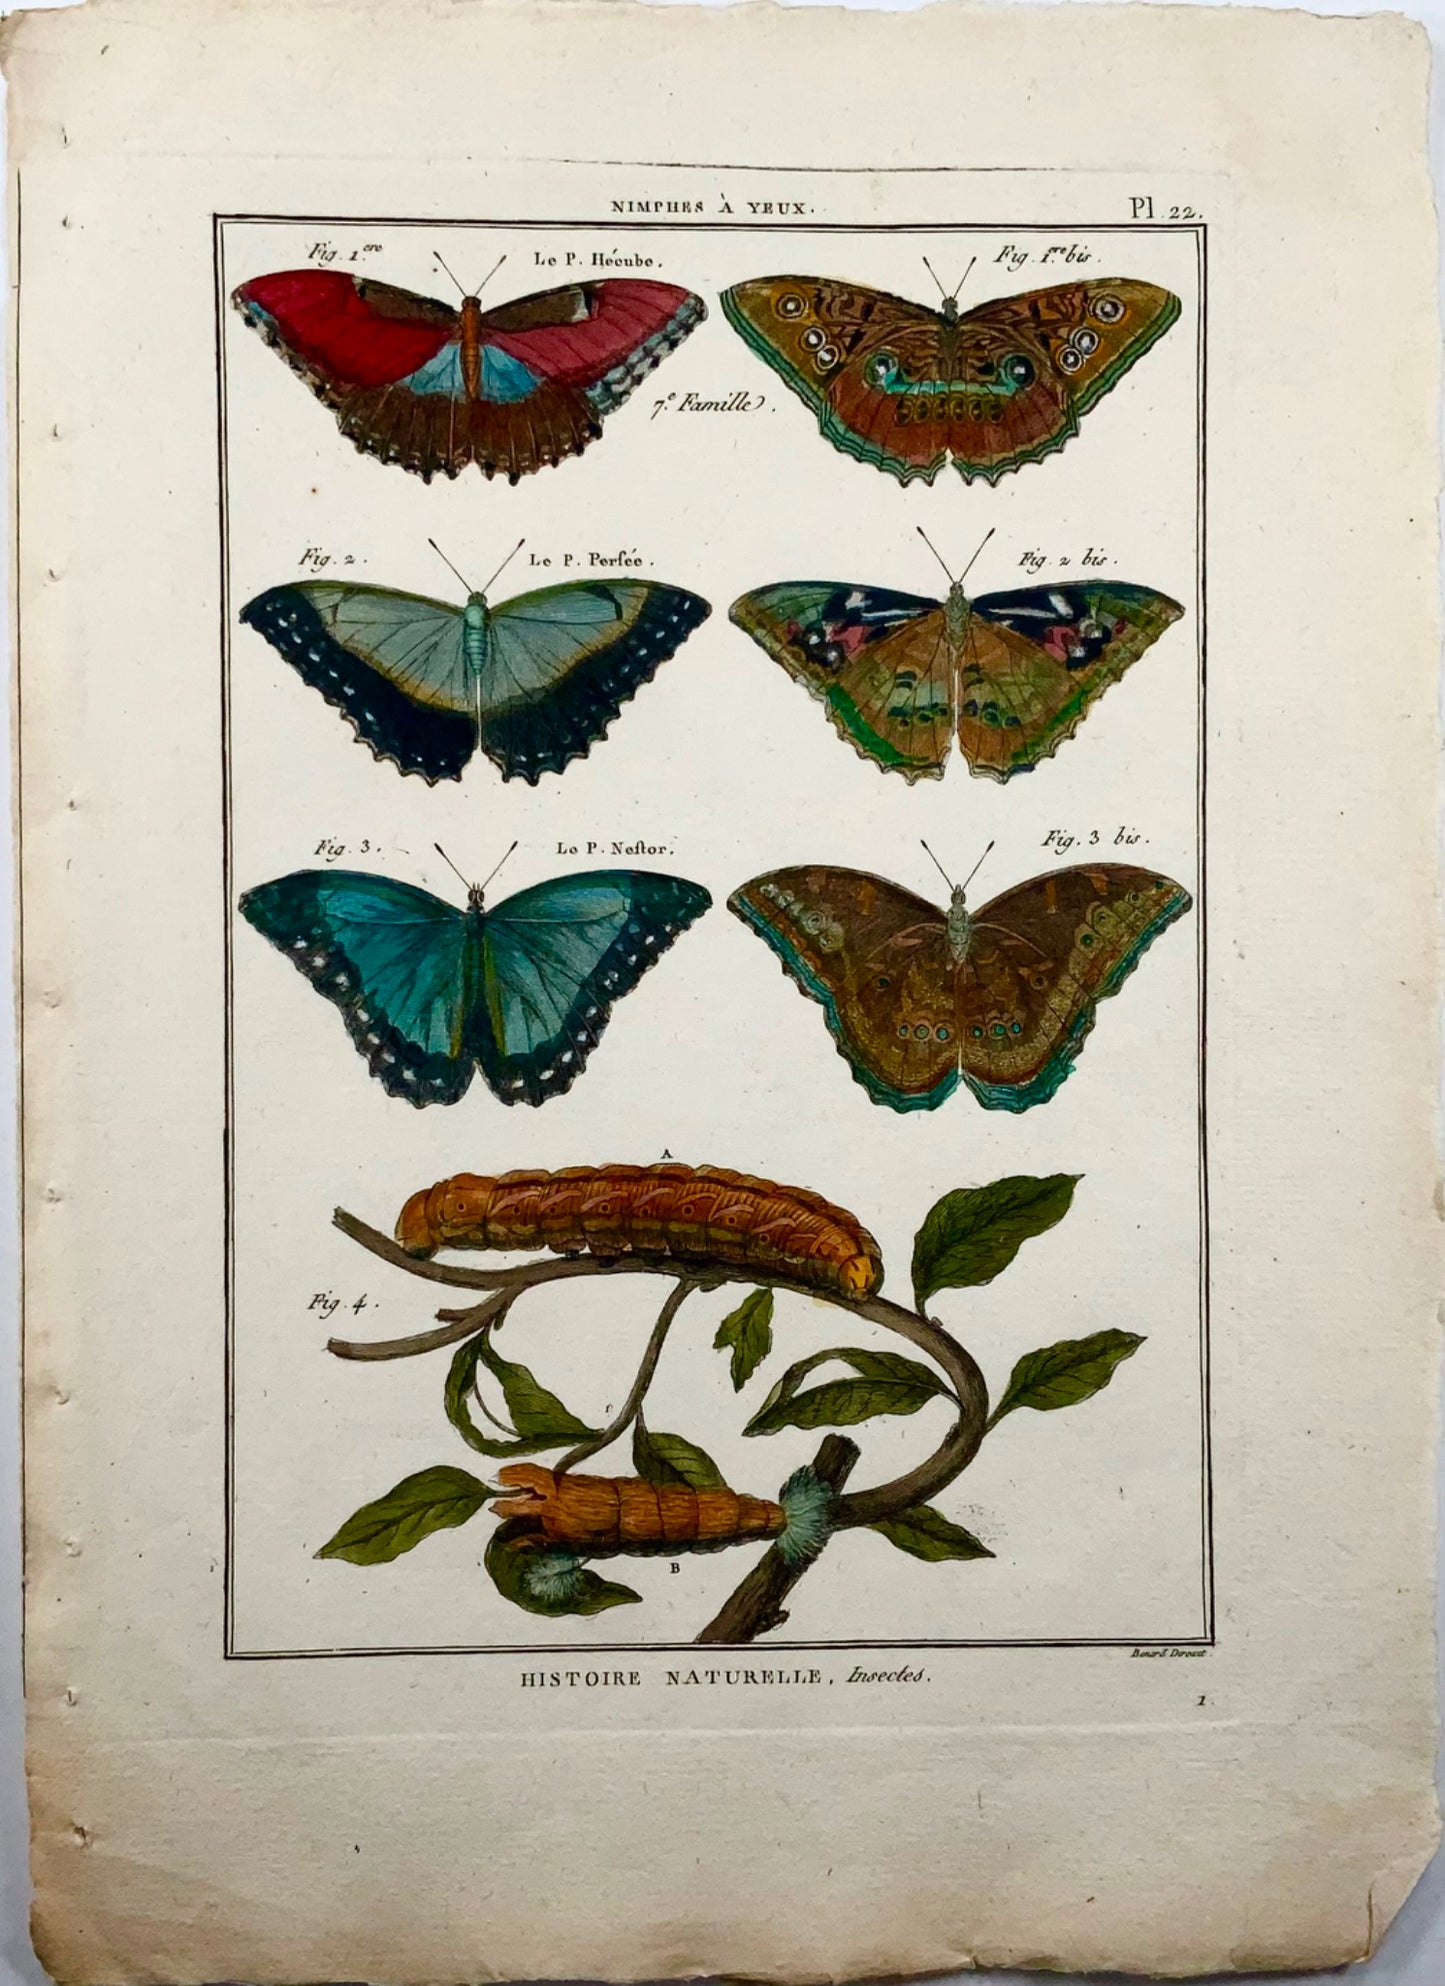 1794 Butterflies, Nymphes, Latreille, hand coloured quarto engraving, insects